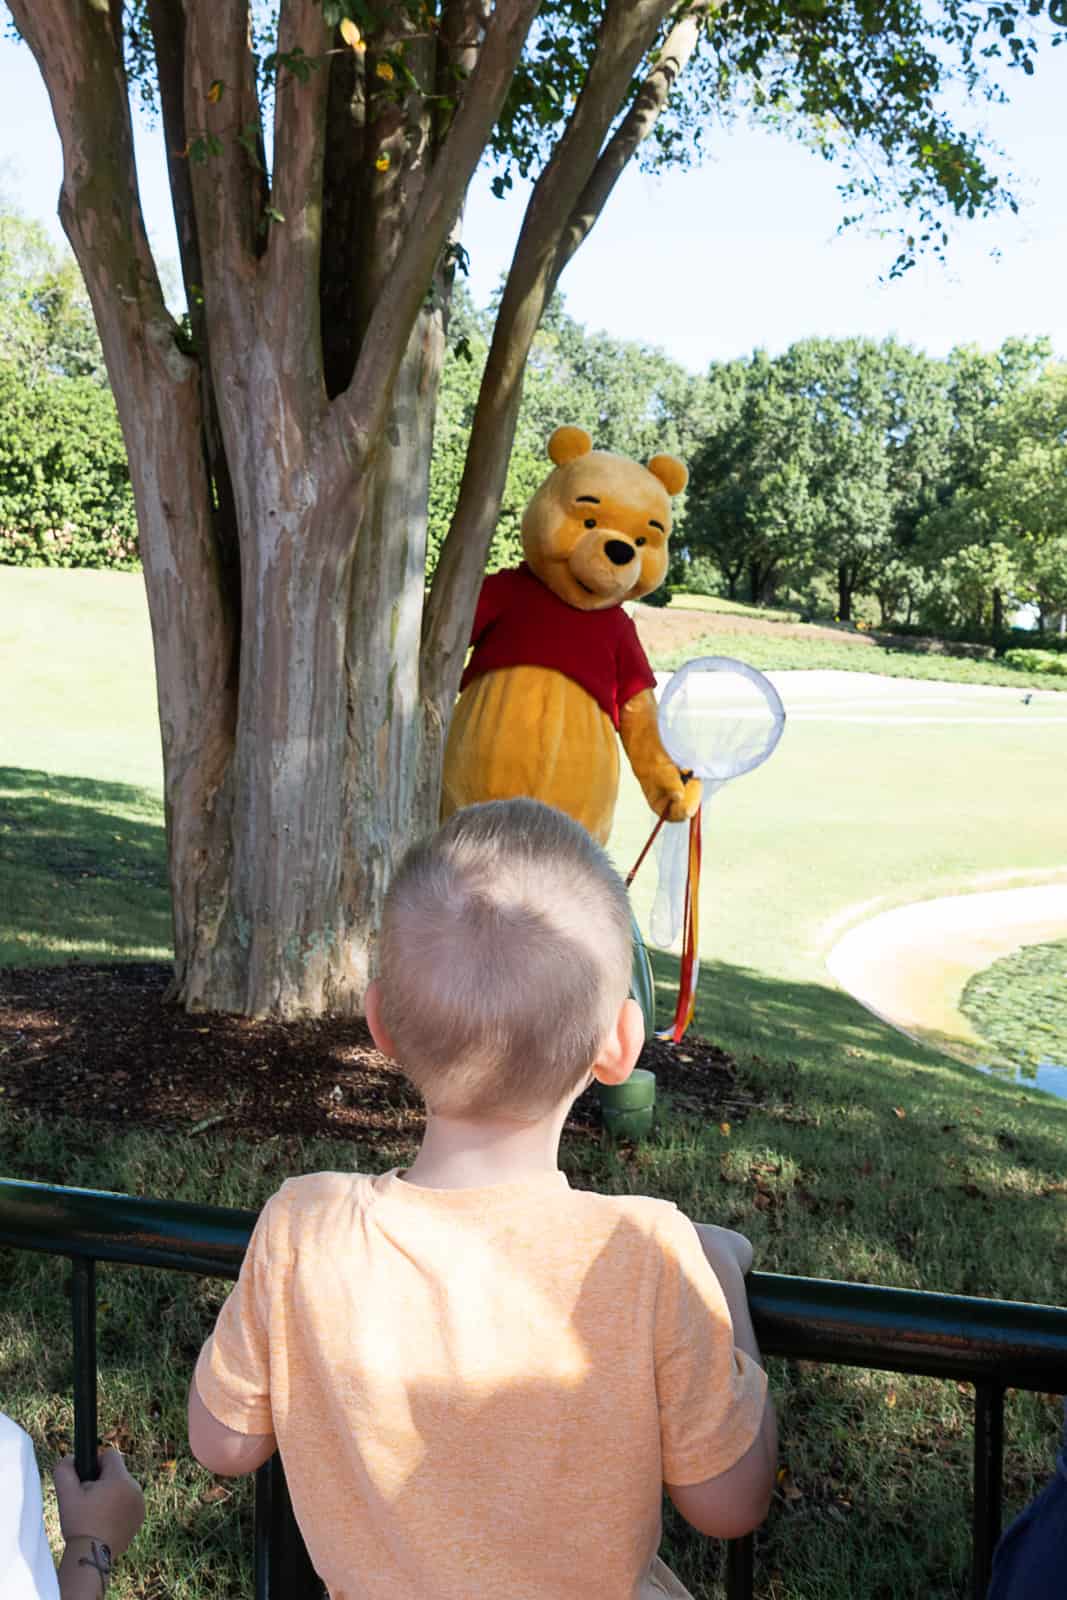 Disney World Character photo spot with Winnie The Pooh in Epcot Outside Figment Ride